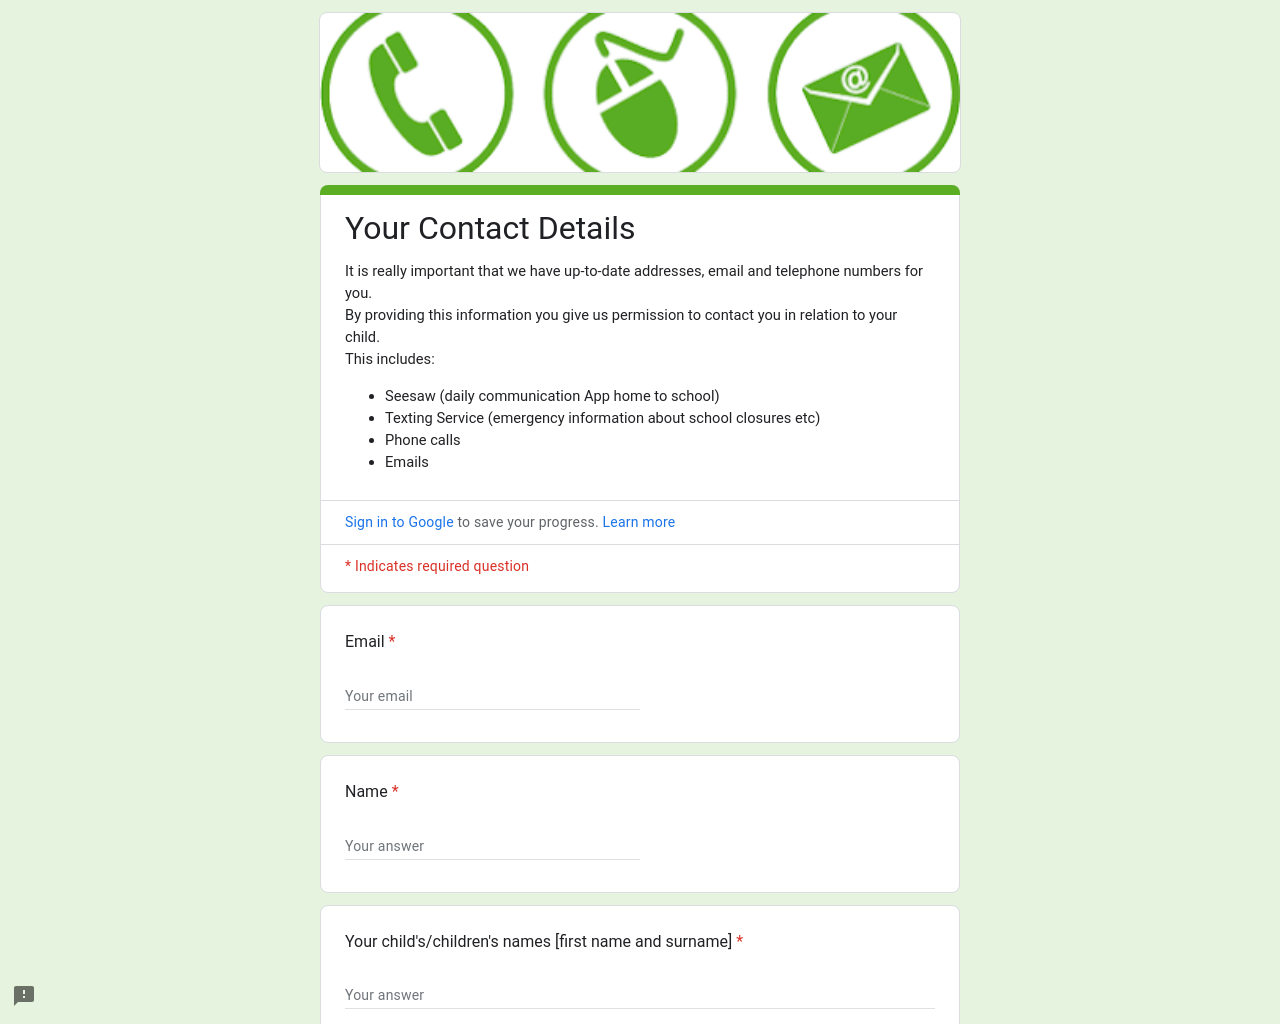 Contact details and Seesaw permission